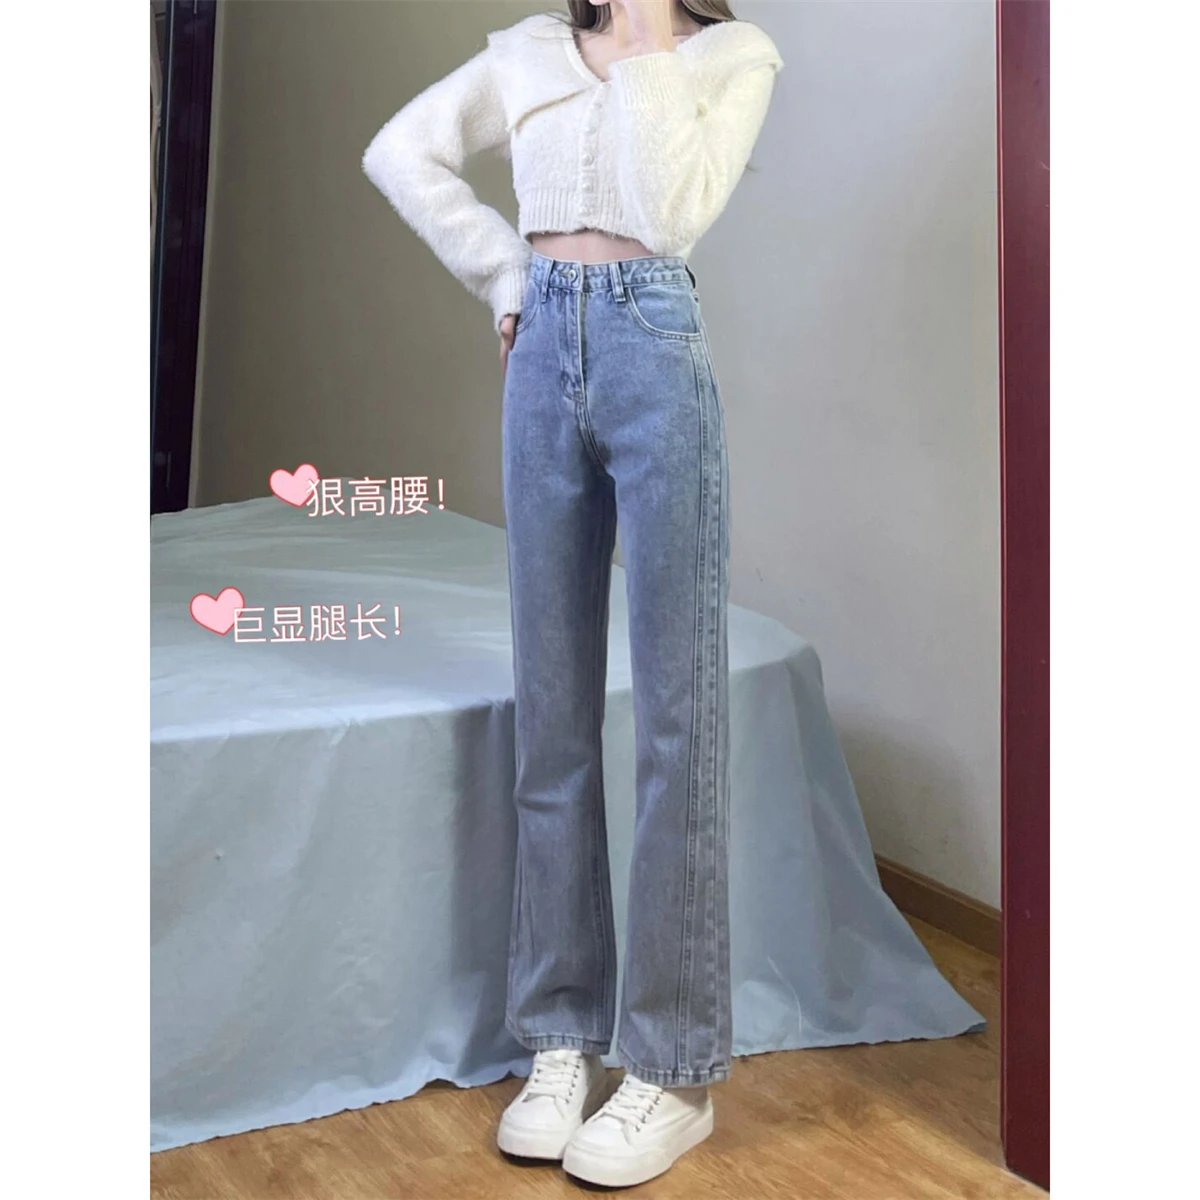 High-Waist Micro-Labelled Jeans Autumn And Winter New Women's Wear Small Design Sense, Thin Wide Leg Straight Pants